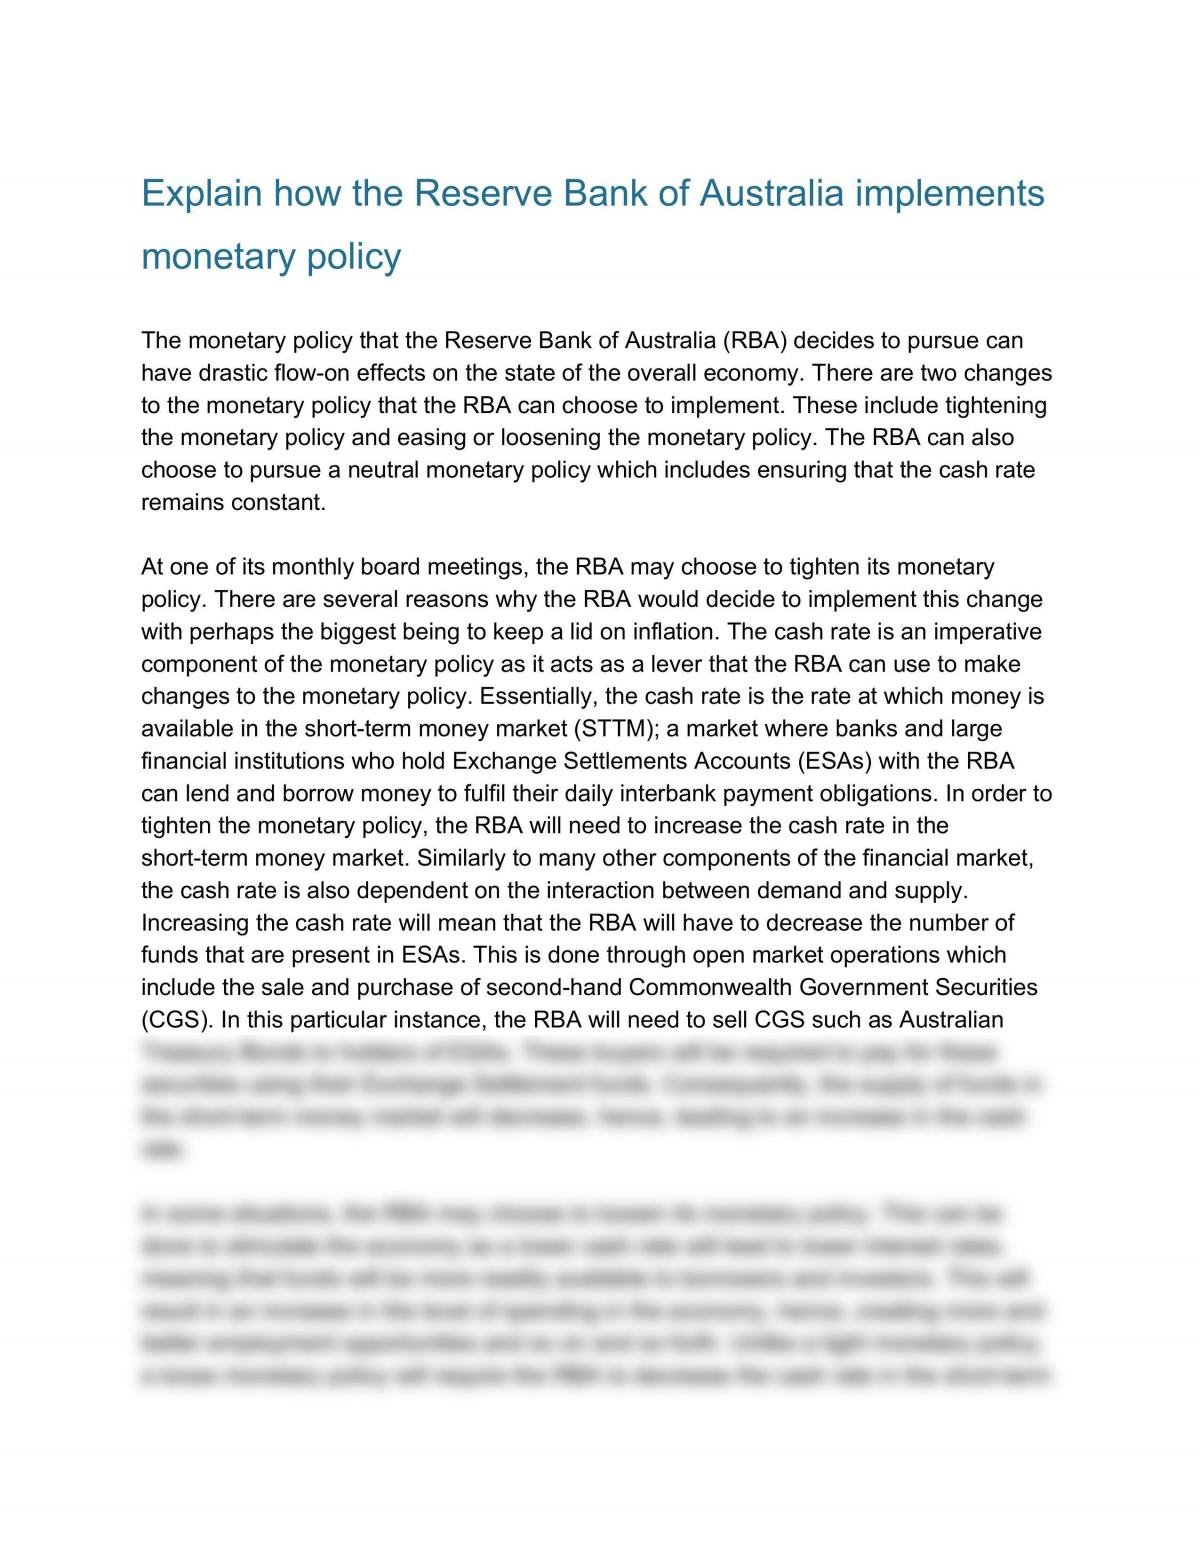 Explain How the RBA Implements Monetary Policy - Page 1